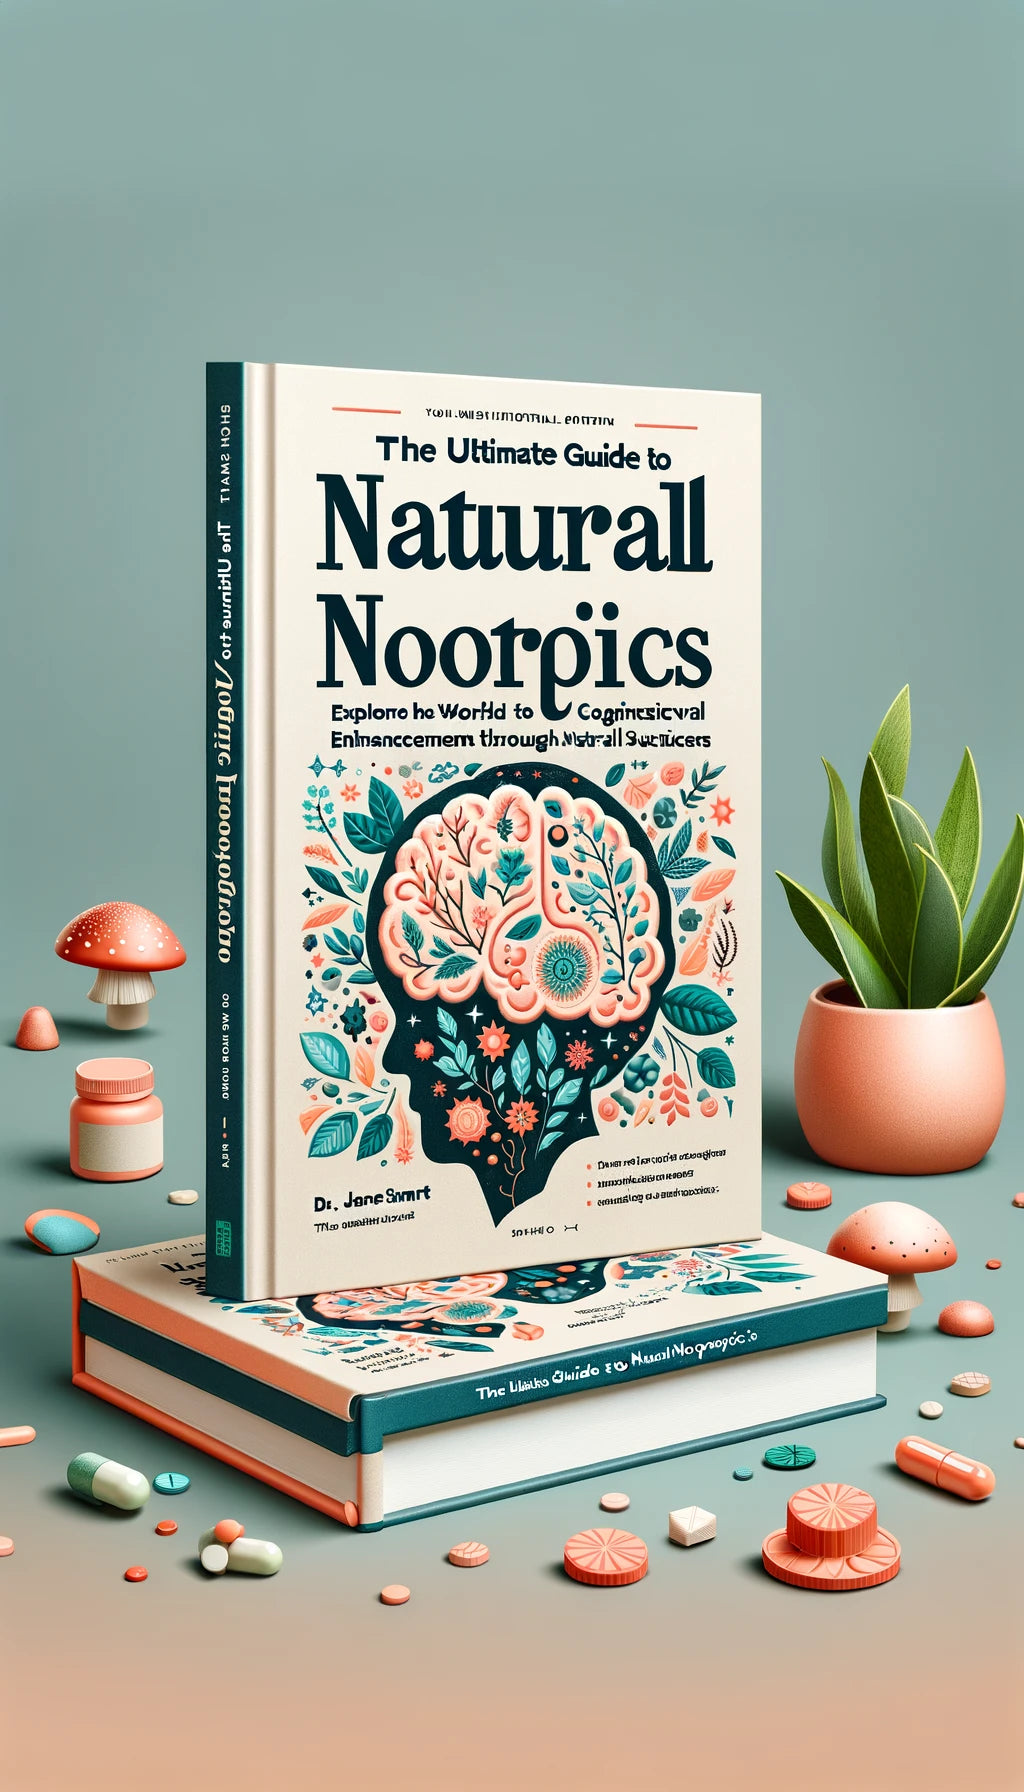 The Ultimate Guide to Natural Nootropics